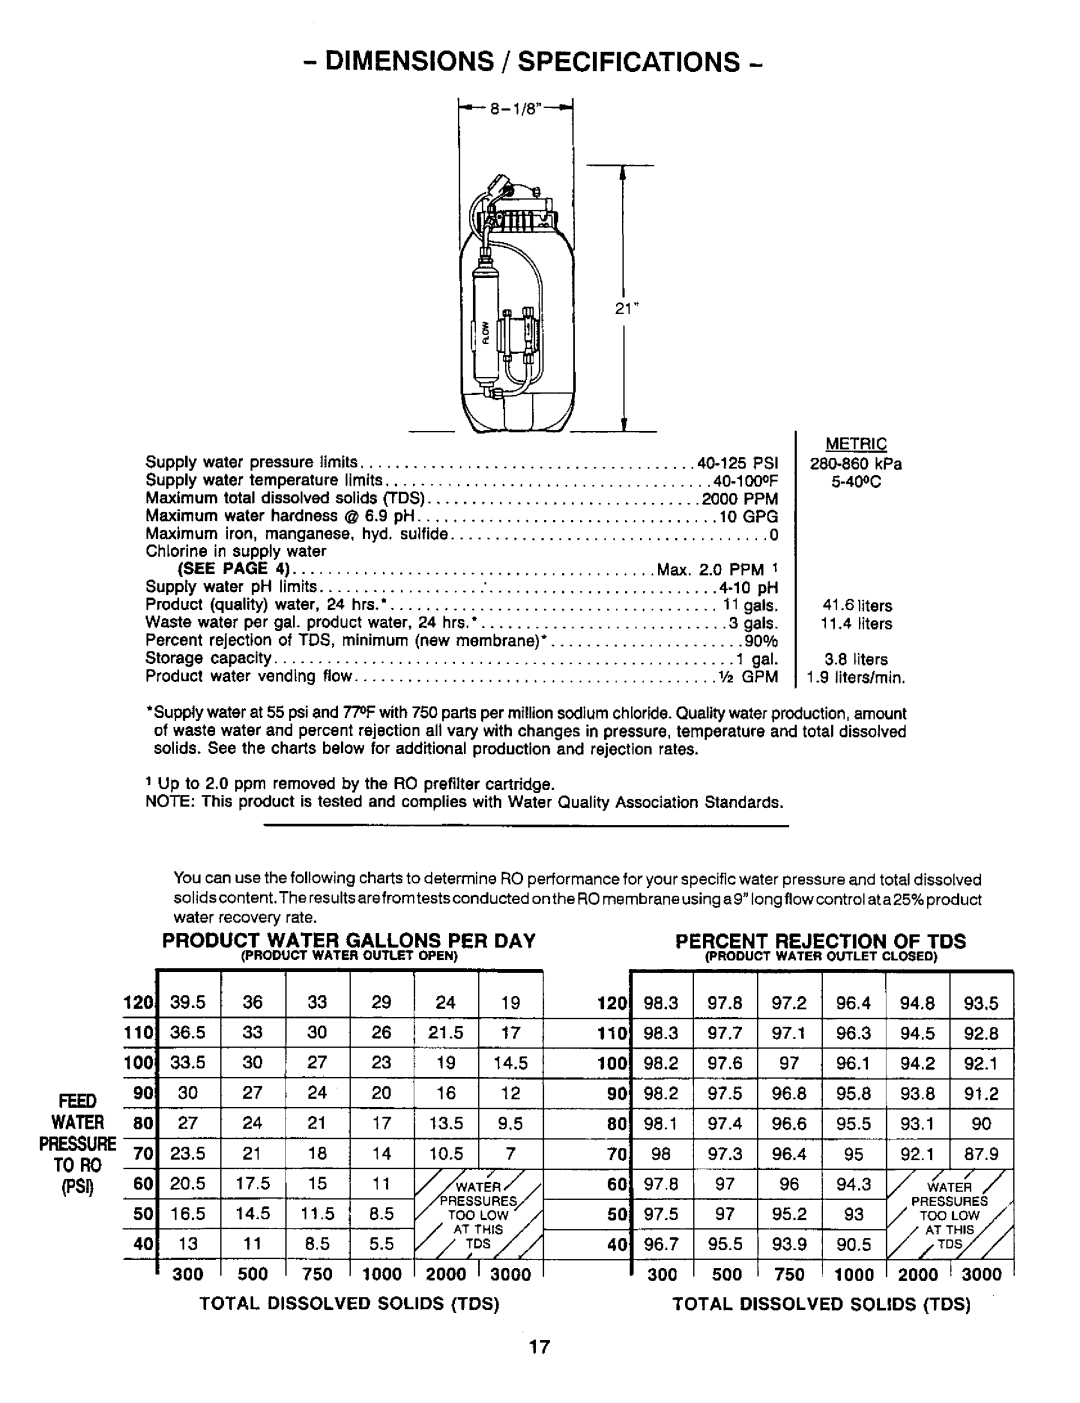 Sears RO 2000 manual Dimensions / Specifications, Too Low, P,Ure 